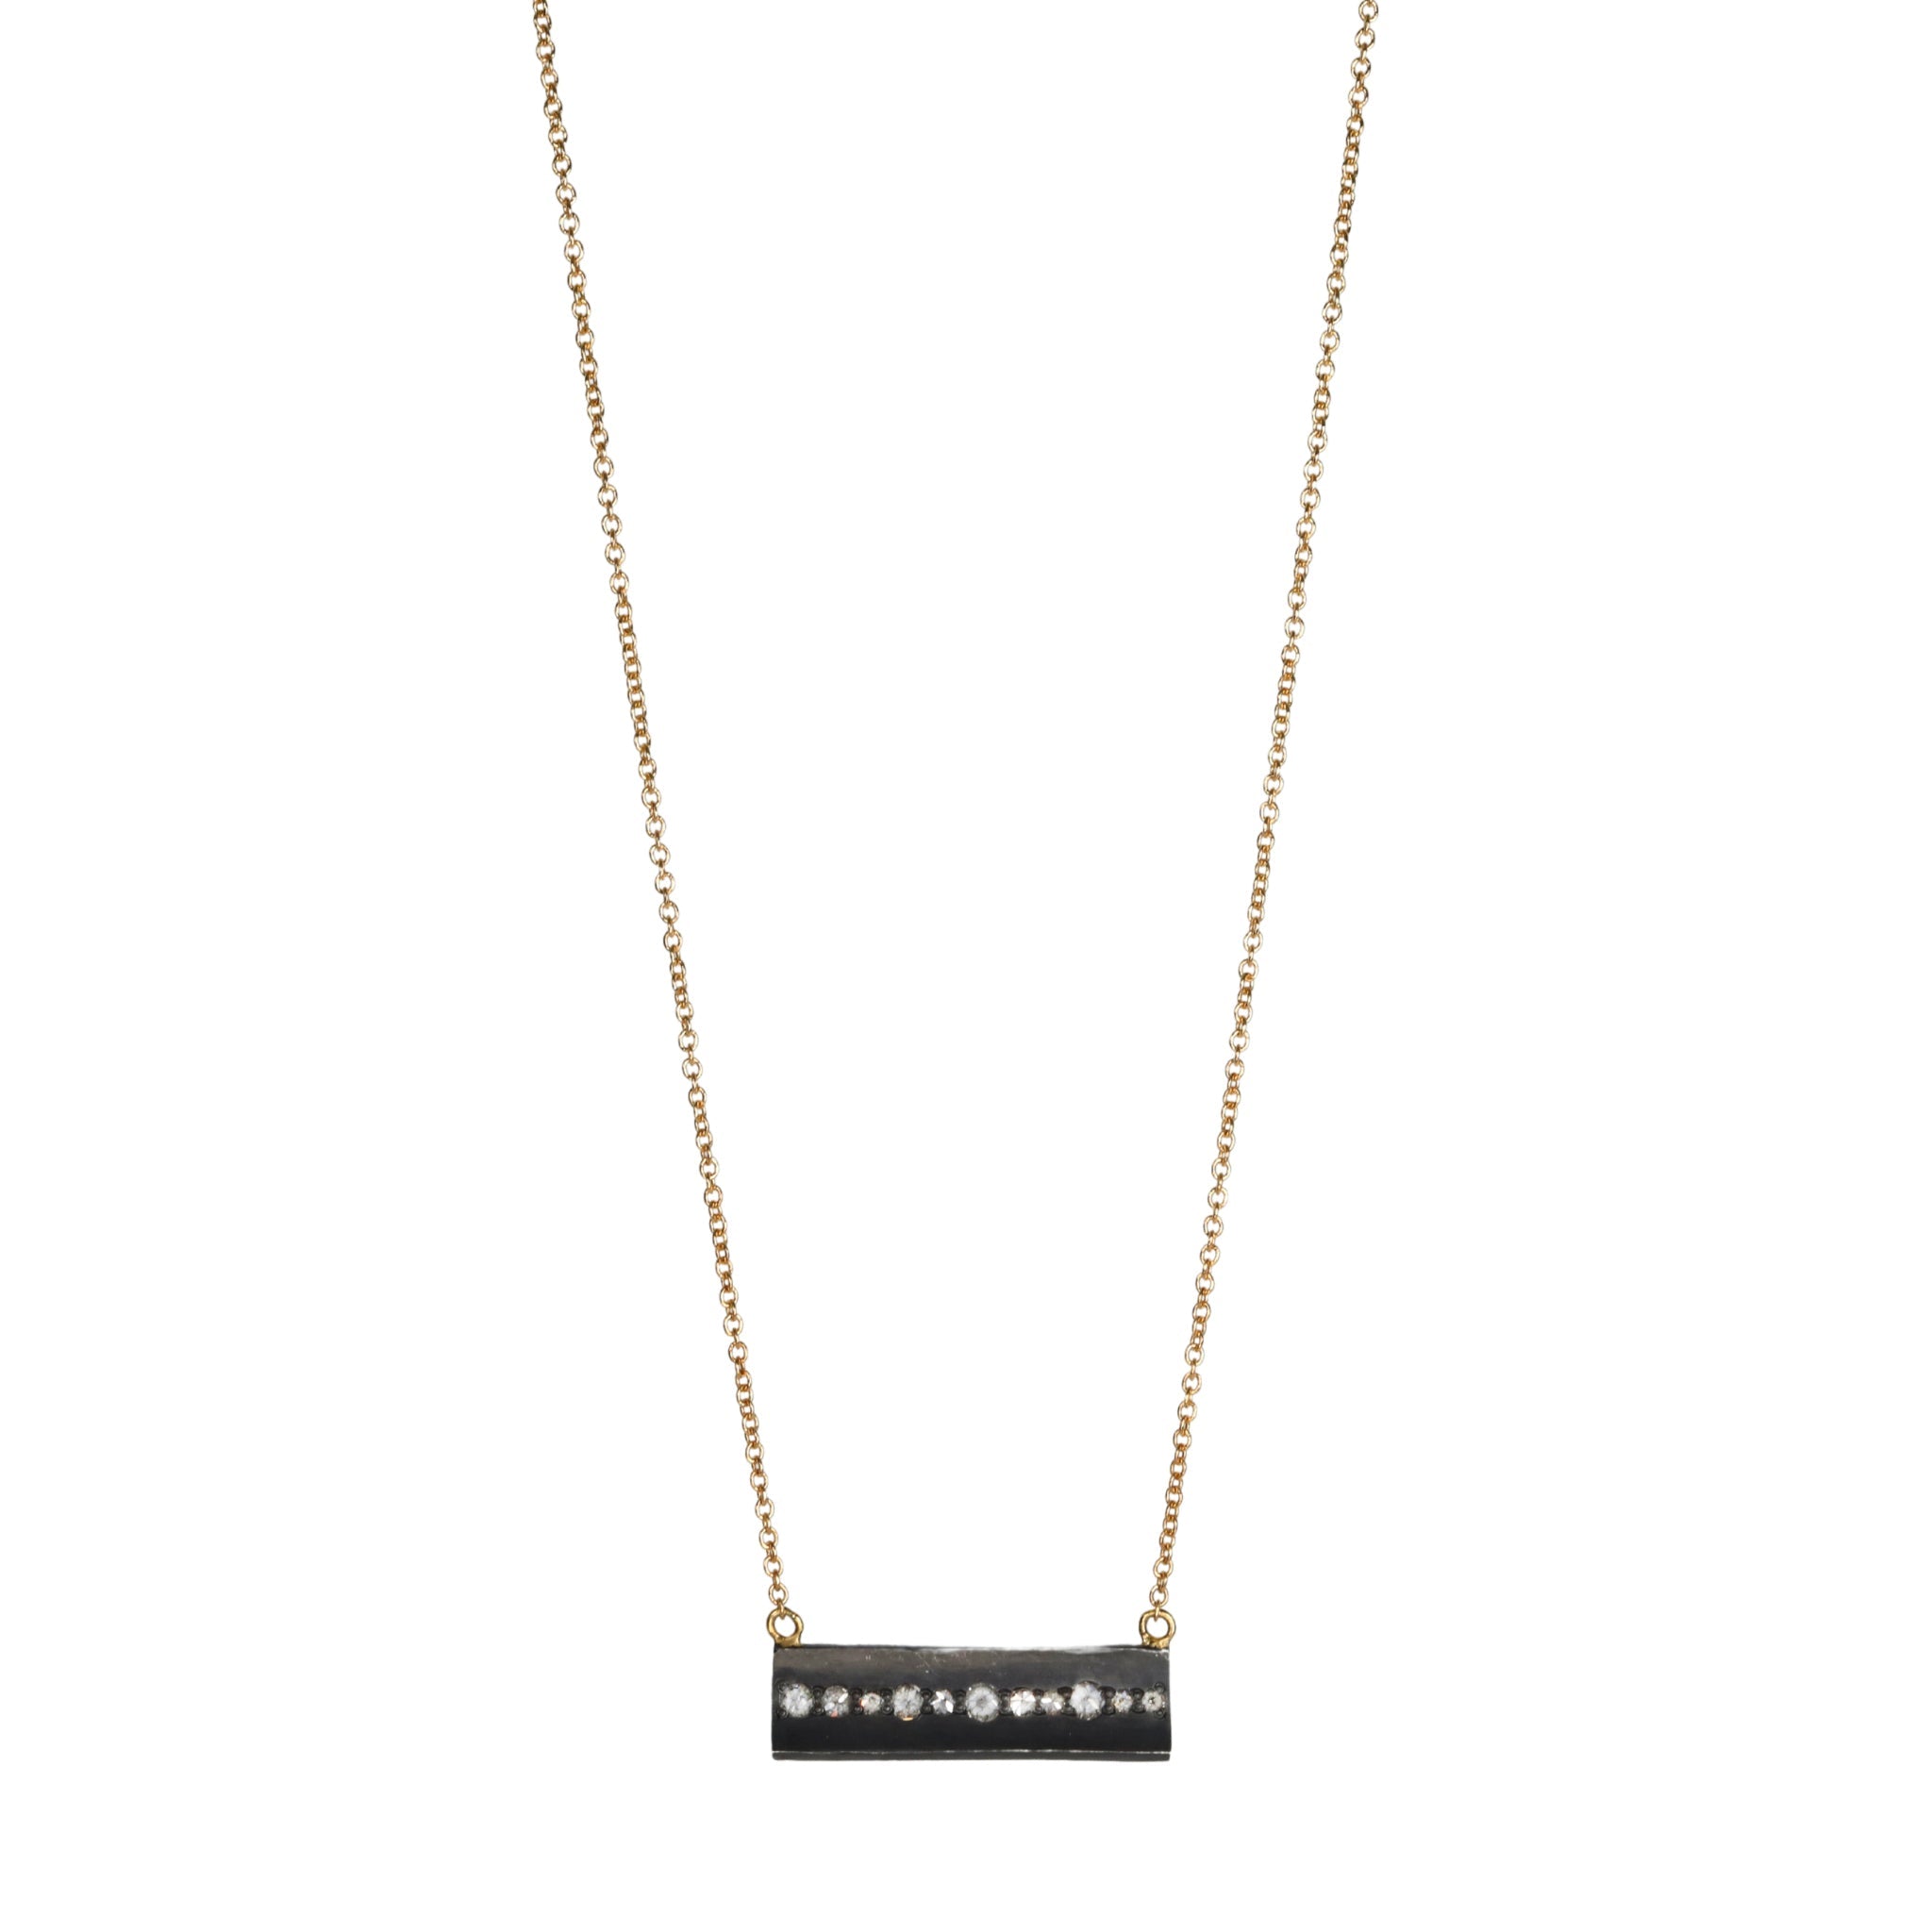 Oxidized Silver Horizontal Rectangular Diamond Necklace on Gold Chain - Peridot Fine Jewelry - TAP by Todd Pownell